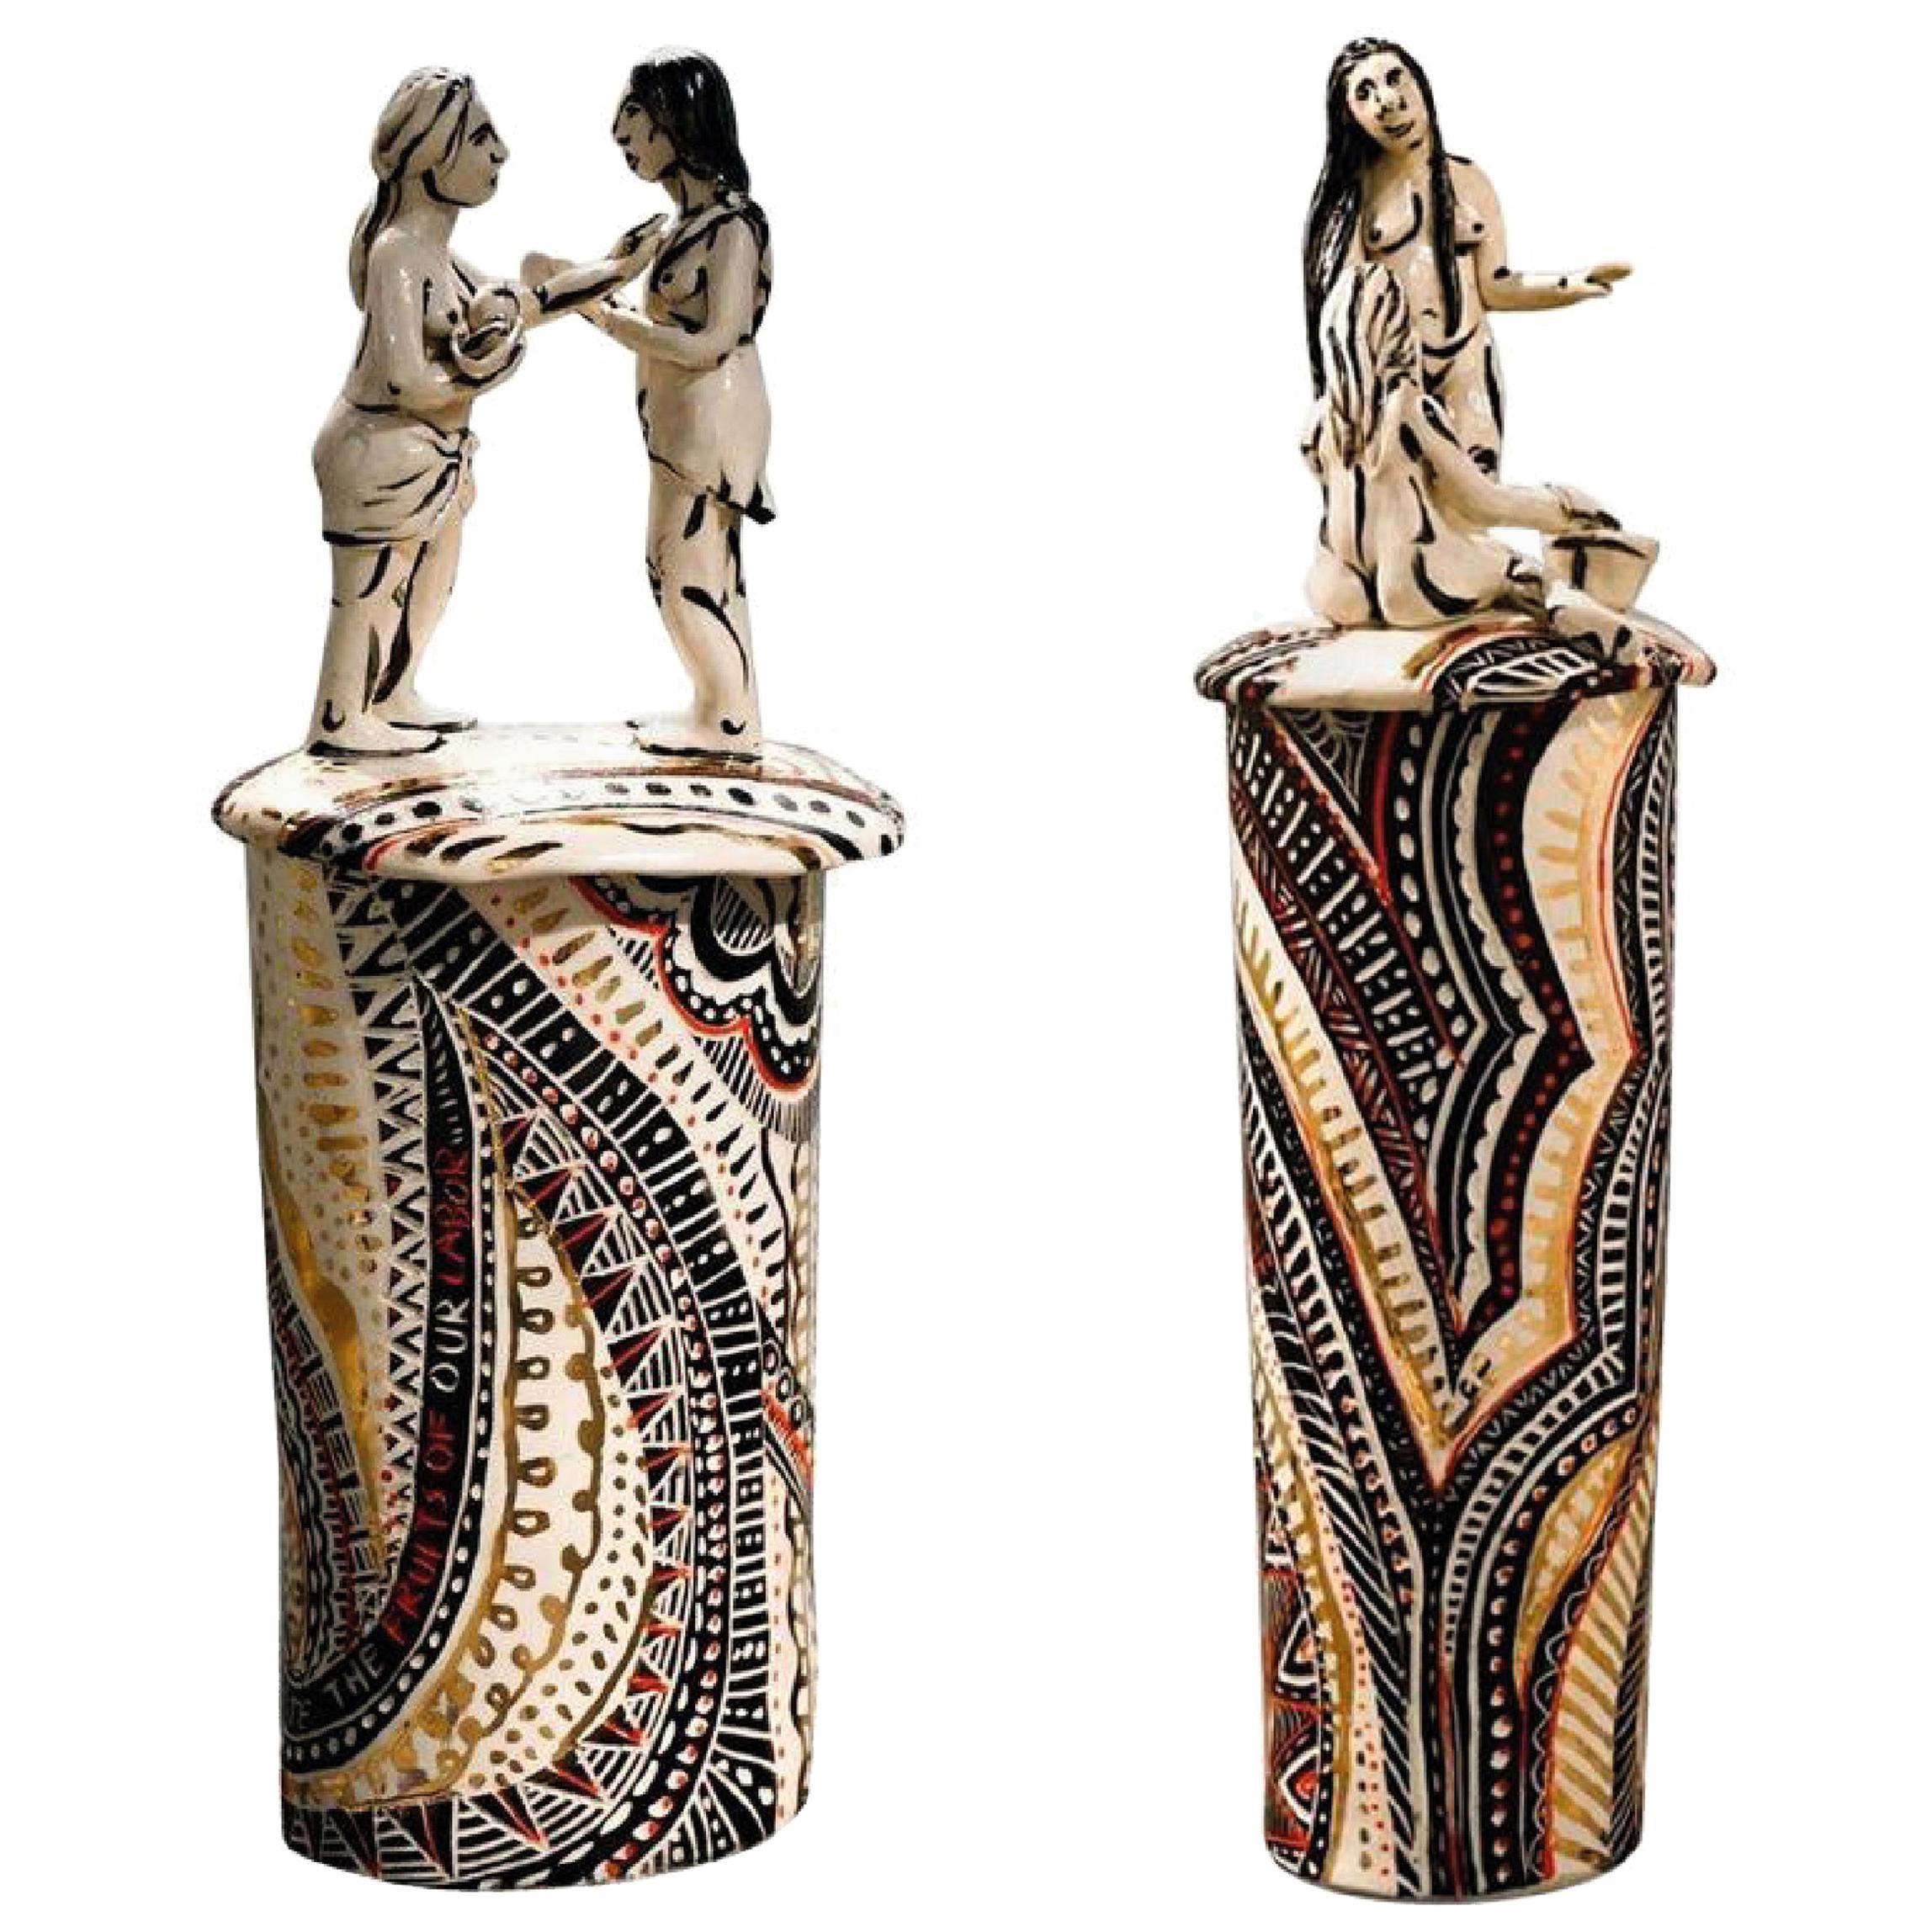 Two sculptures. The Historic Jar Series. Porcelain, with hand-painted details